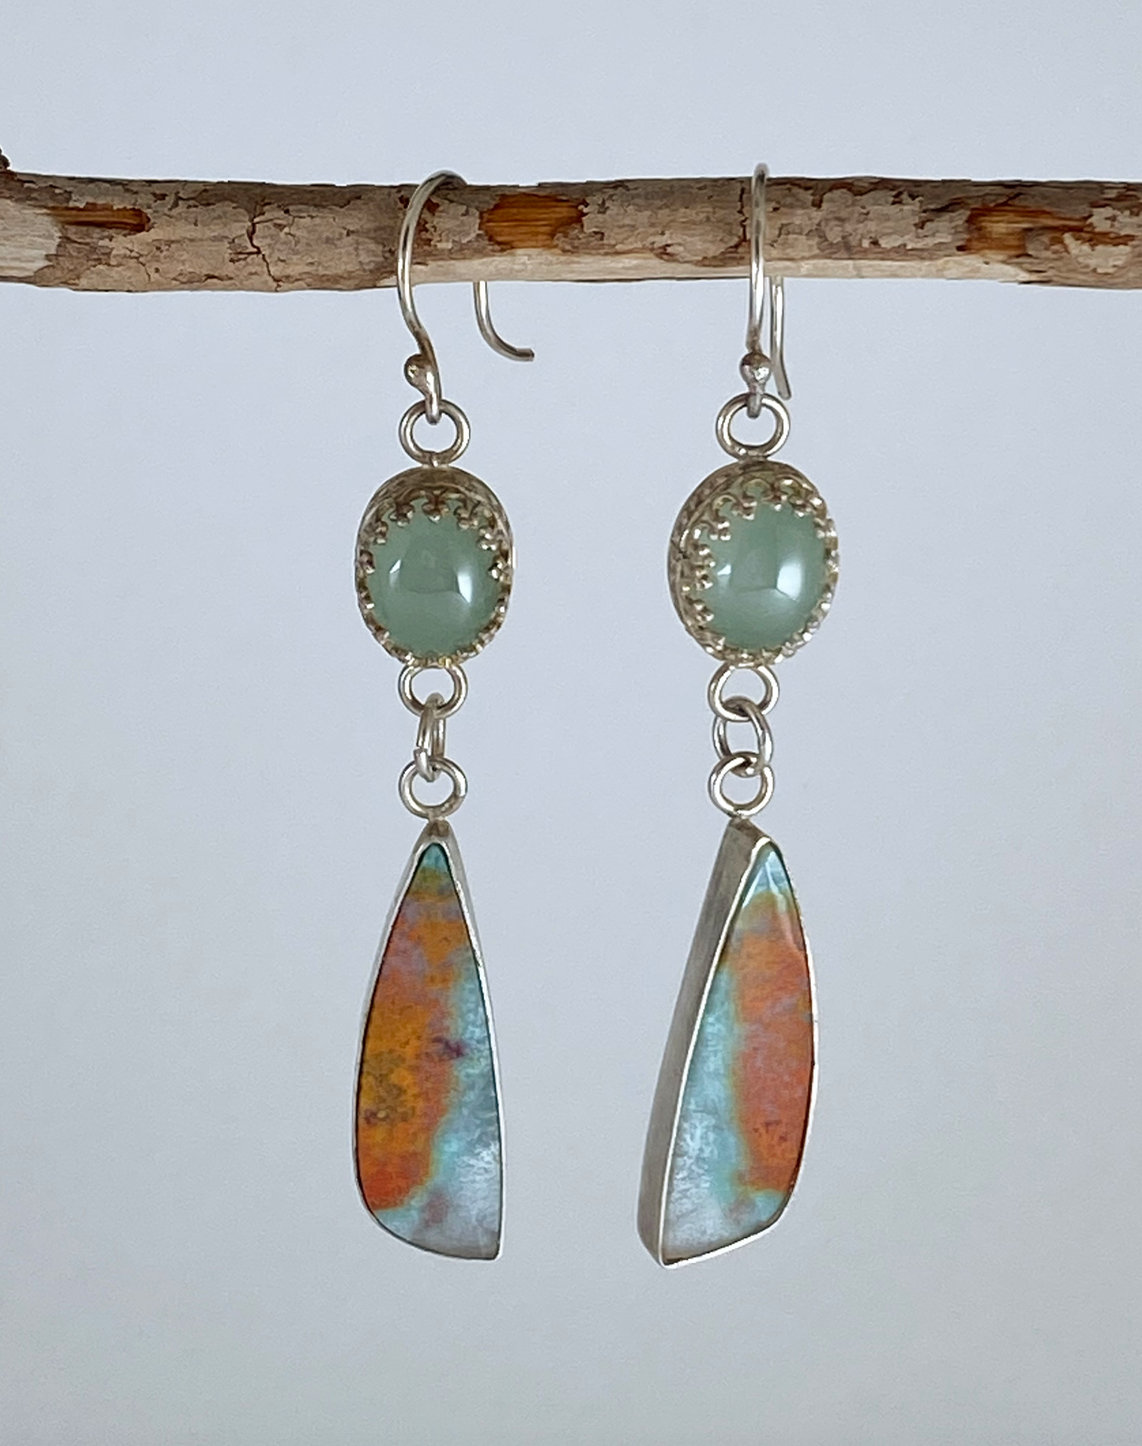 One-of-a-kind hand-crafted earrings. Two headline stones: A gorgeous "sunrise" blue and orange Indonesian opal/petrified wood under stunning green chalcedony; Set on sterling silver, chalcedony in decorative gallery wire bezel Style: rustic, boho, elemental, earthy yet elegant